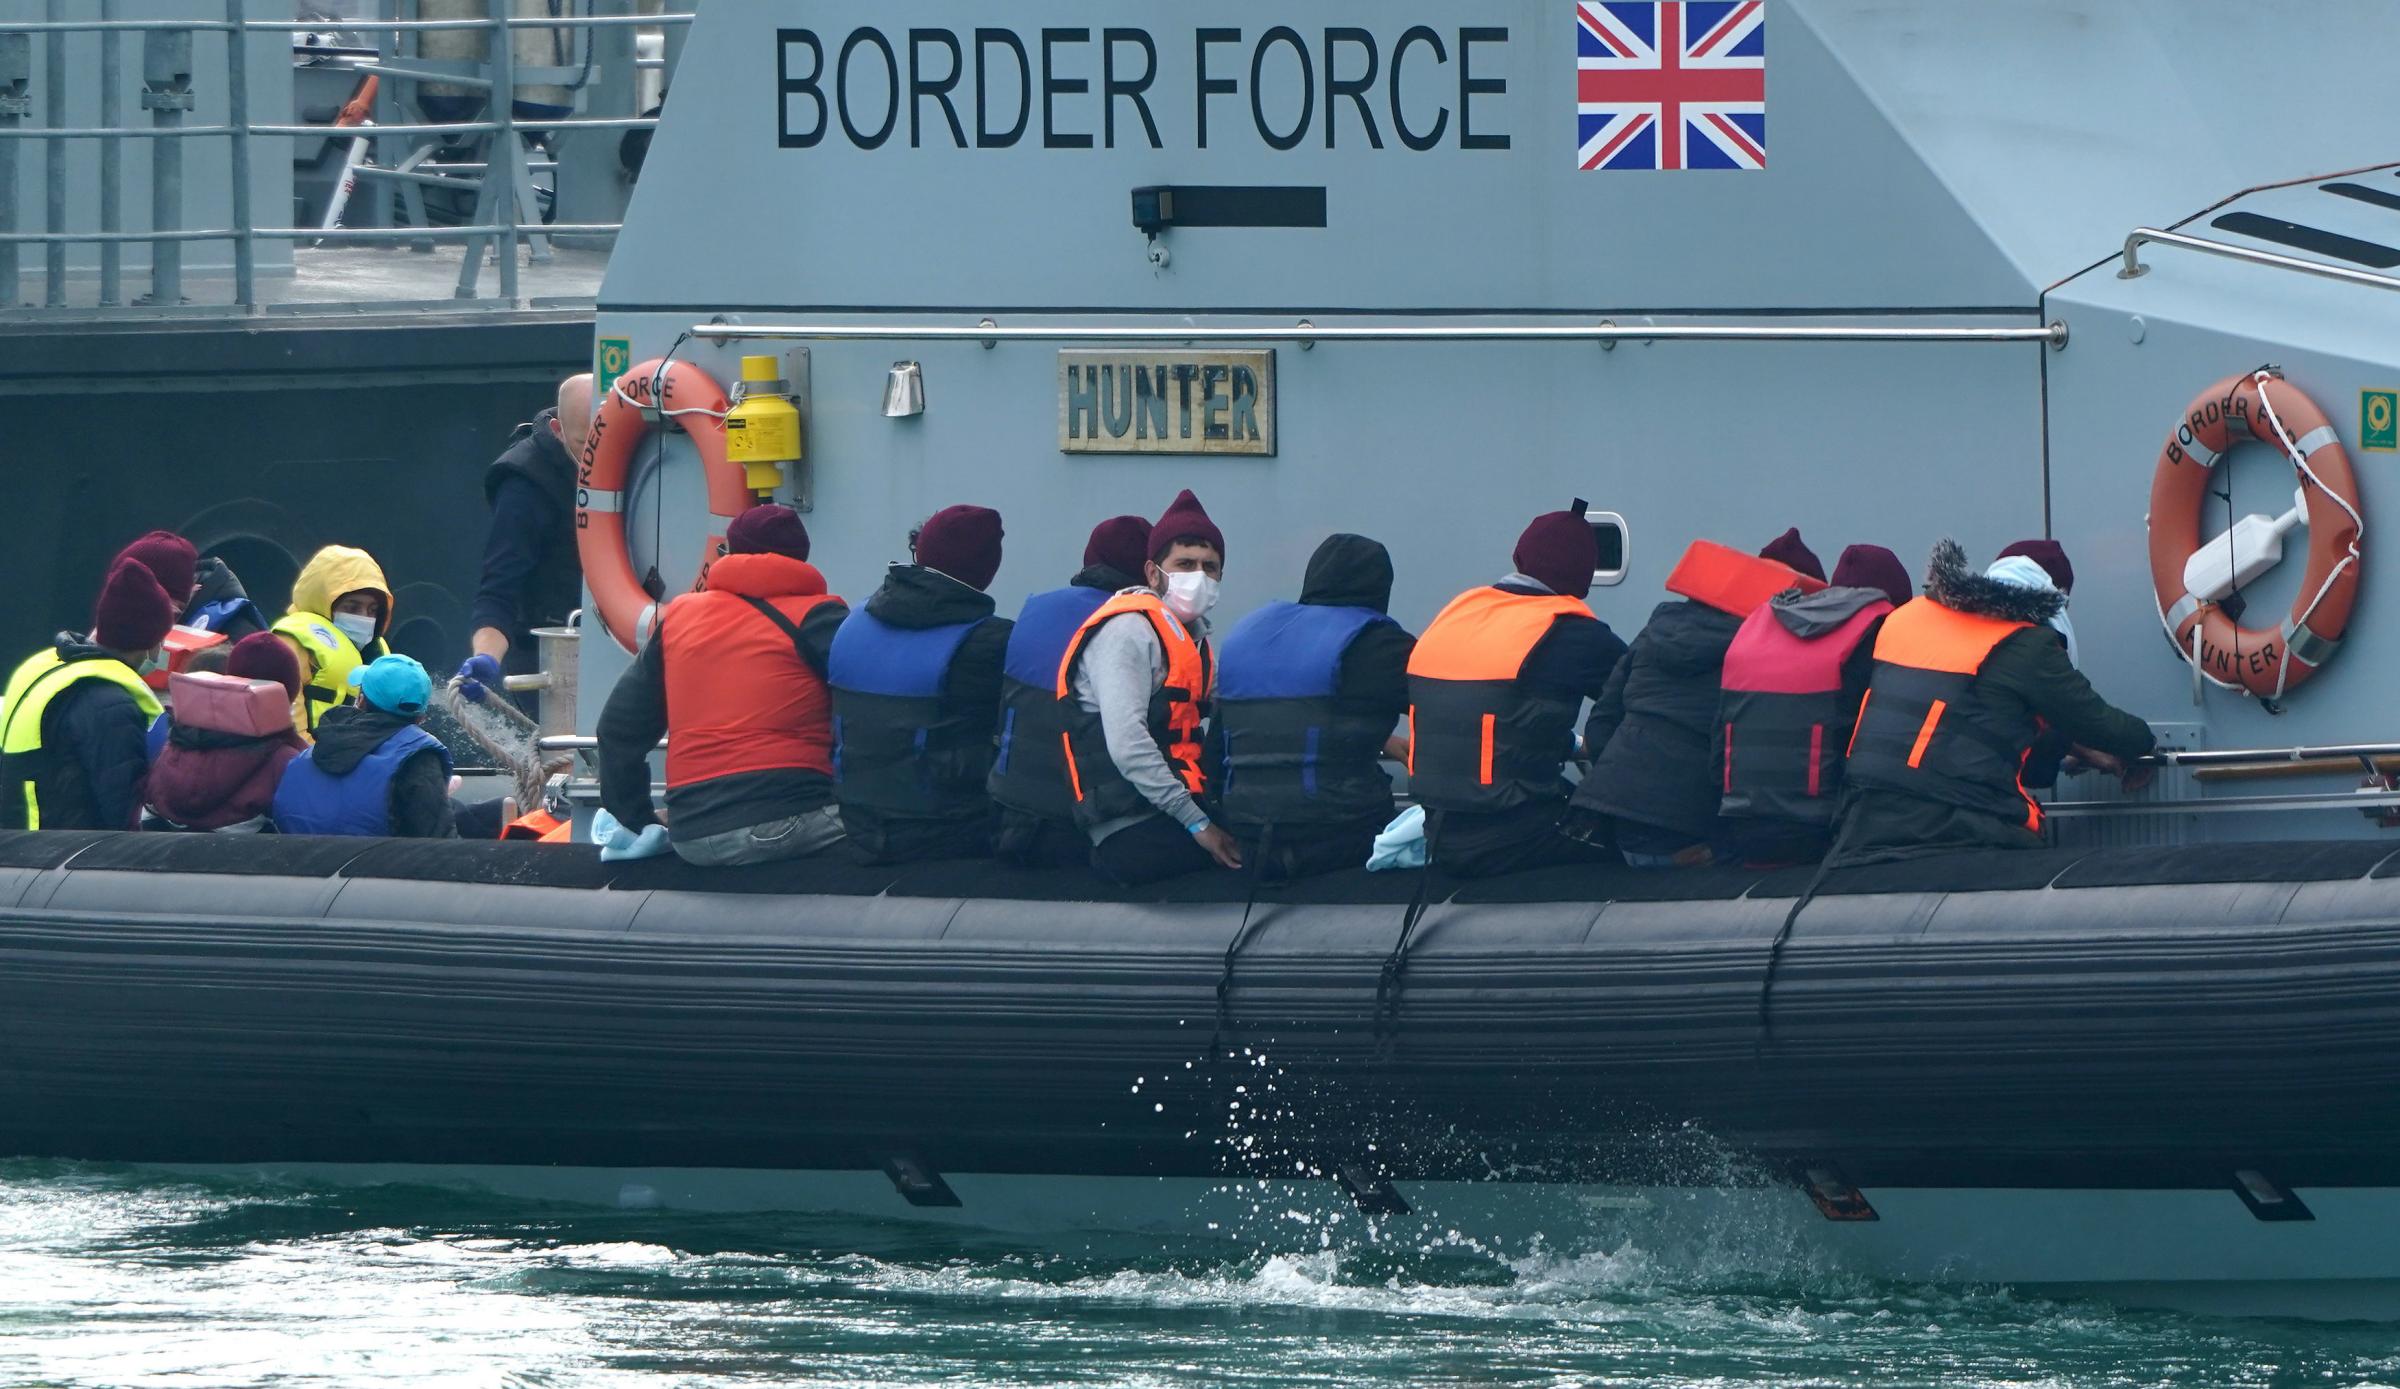 The PM might try to weaponise the migrants situation